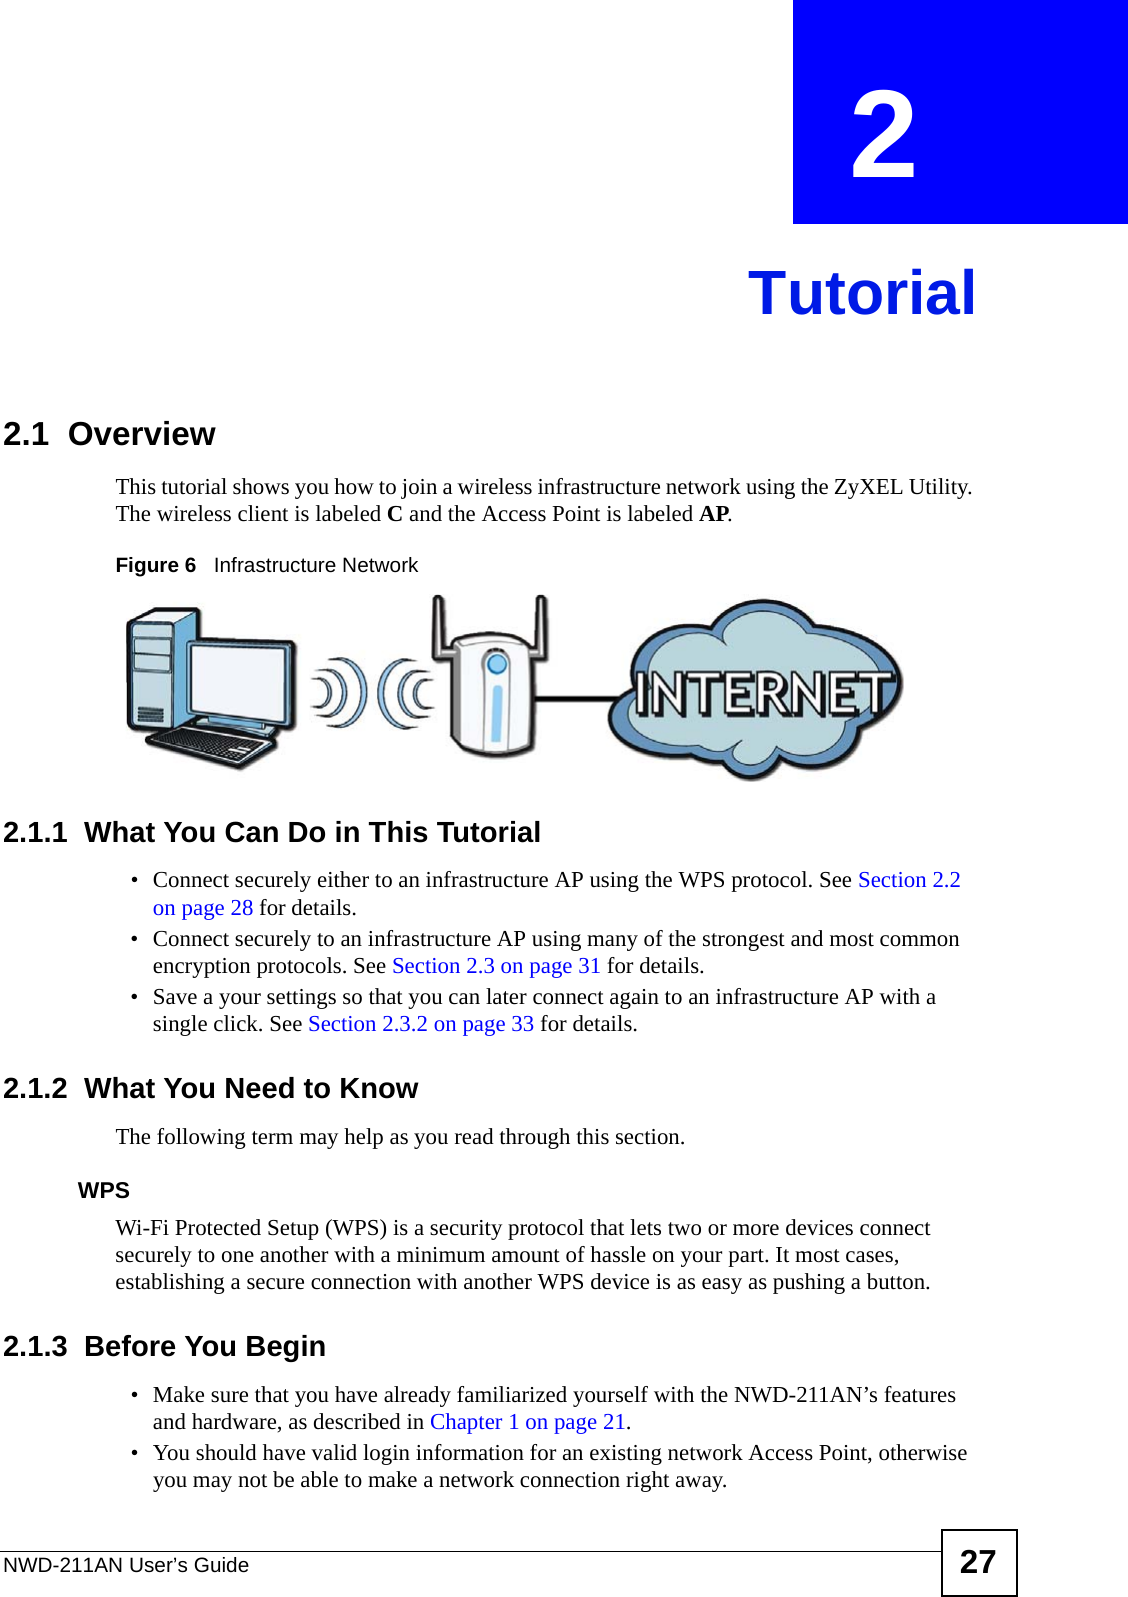 NWD-211AN User’s Guide 27CHAPTER  2 Tutorial2.1  OverviewThis tutorial shows you how to join a wireless infrastructure network using the ZyXEL Utility. The wireless client is labeled C and the Access Point is labeled AP.Figure 6   Infrastructure Network2.1.1  What You Can Do in This Tutorial• Connect securely either to an infrastructure AP using the WPS protocol. See Section 2.2 on page 28 for details.• Connect securely to an infrastructure AP using many of the strongest and most common encryption protocols. See Section 2.3 on page 31 for details.• Save a your settings so that you can later connect again to an infrastructure AP with a single click. See Section 2.3.2 on page 33 for details.2.1.2  What You Need to KnowThe following term may help as you read through this section.WPSWi-Fi Protected Setup (WPS) is a security protocol that lets two or more devices connect securely to one another with a minimum amount of hassle on your part. It most cases, establishing a secure connection with another WPS device is as easy as pushing a button.2.1.3  Before You Begin• Make sure that you have already familiarized yourself with the NWD-211AN’s features and hardware, as described in Chapter 1 on page 21.• You should have valid login information for an existing network Access Point, otherwise you may not be able to make a network connection right away.